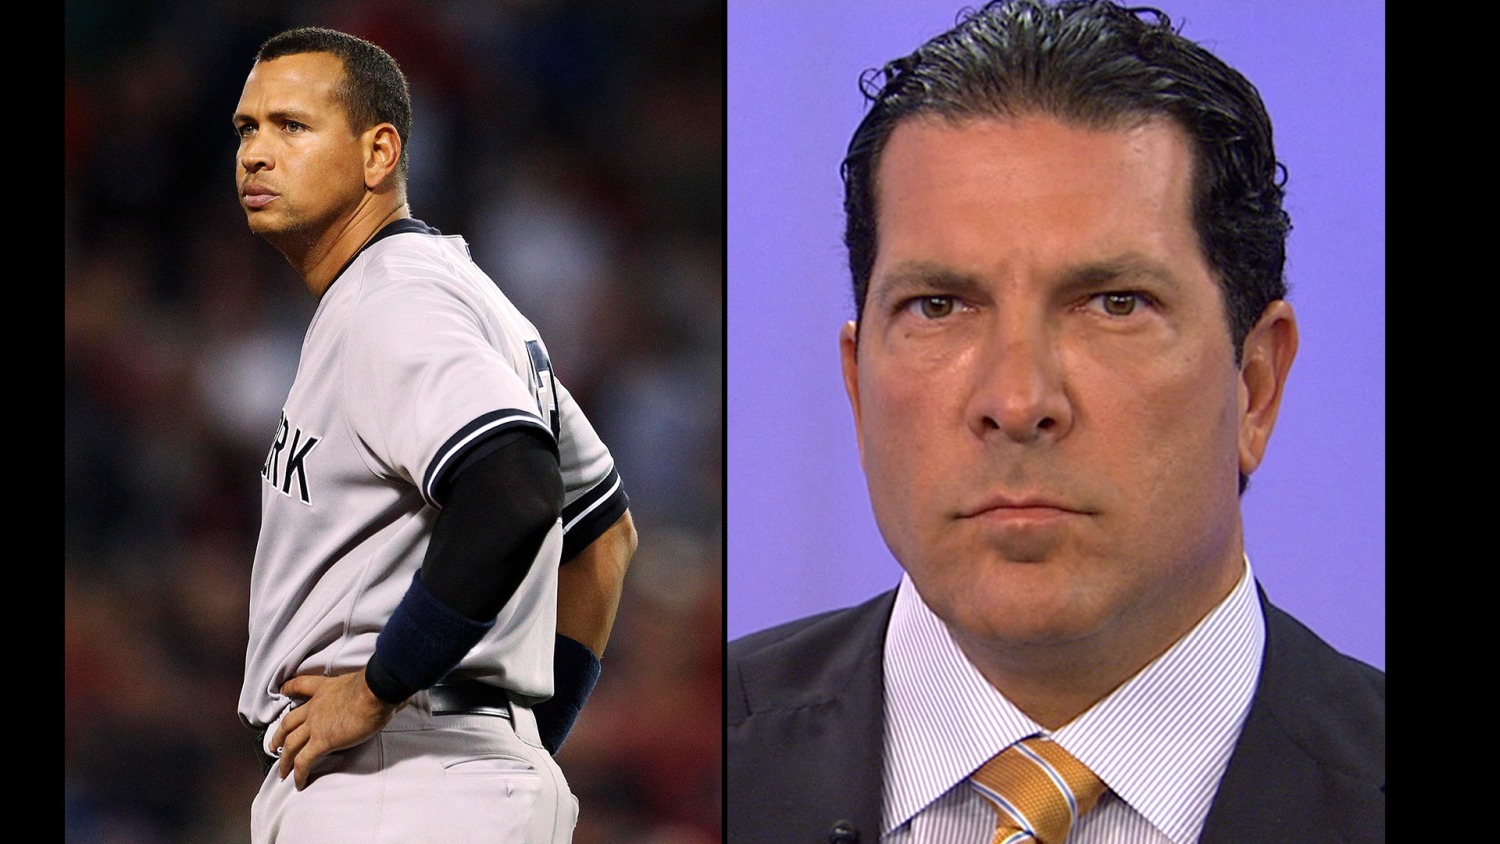 Report: MLB expected to suspend A-Rod, Braun and others